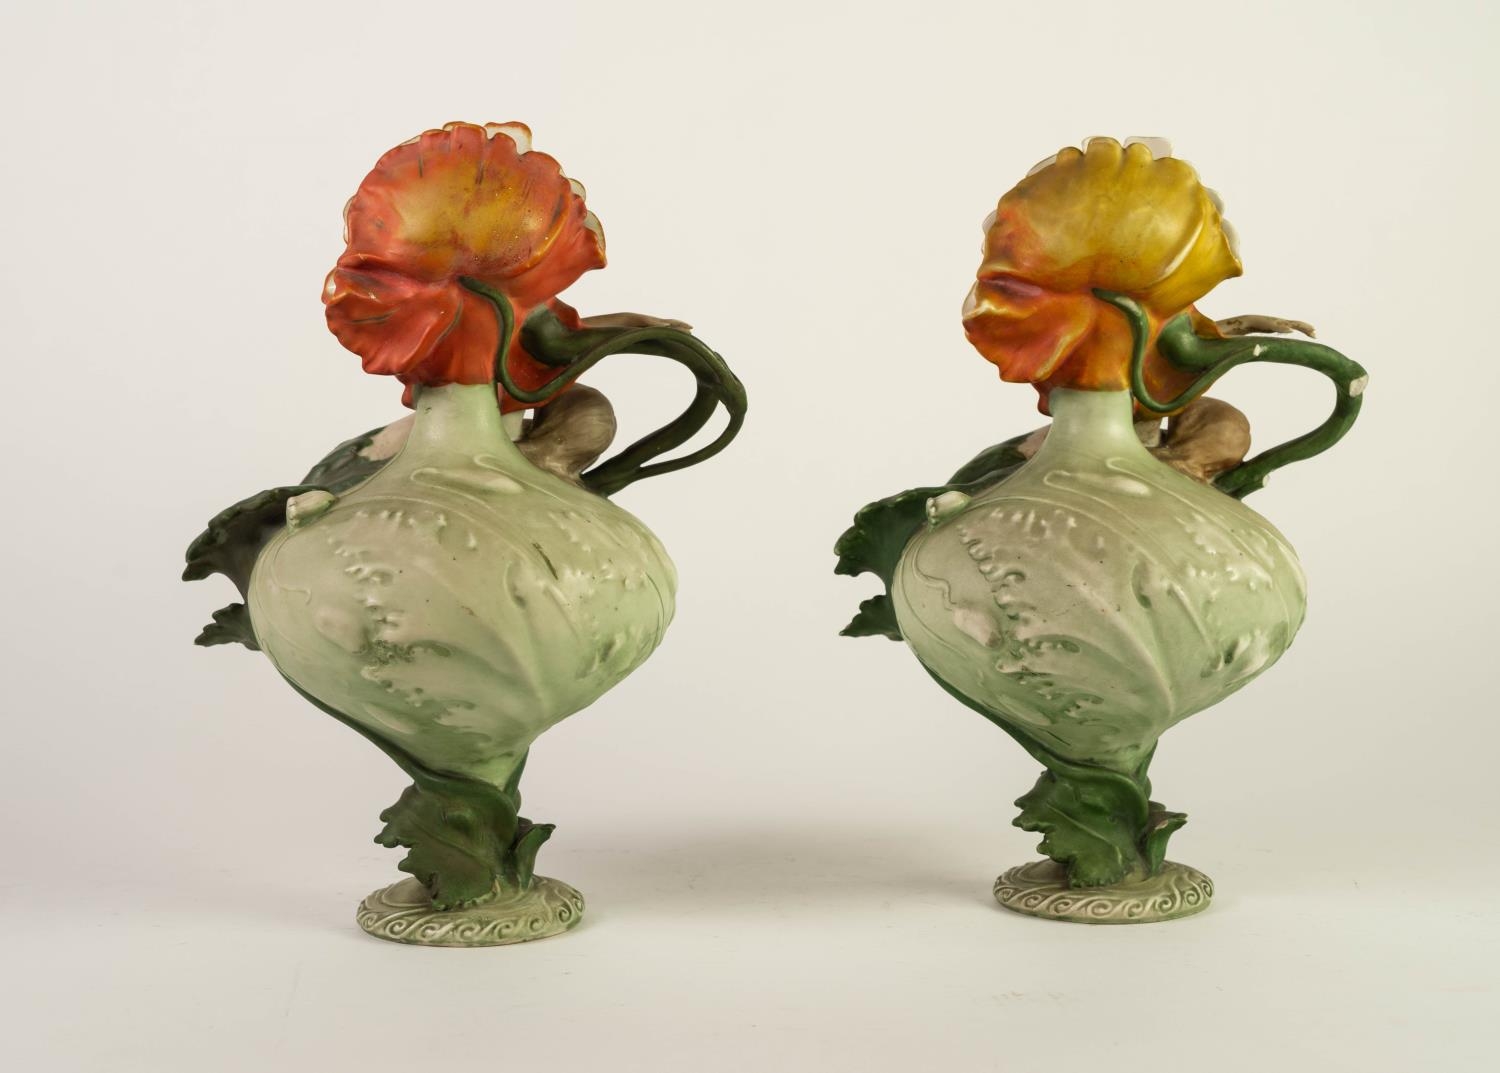 MATCHING PAIR OF ROYAL DUX STYLE FIGURAL PEDESTAL ORNAMENTS, each painted in muted tones and - Image 2 of 2